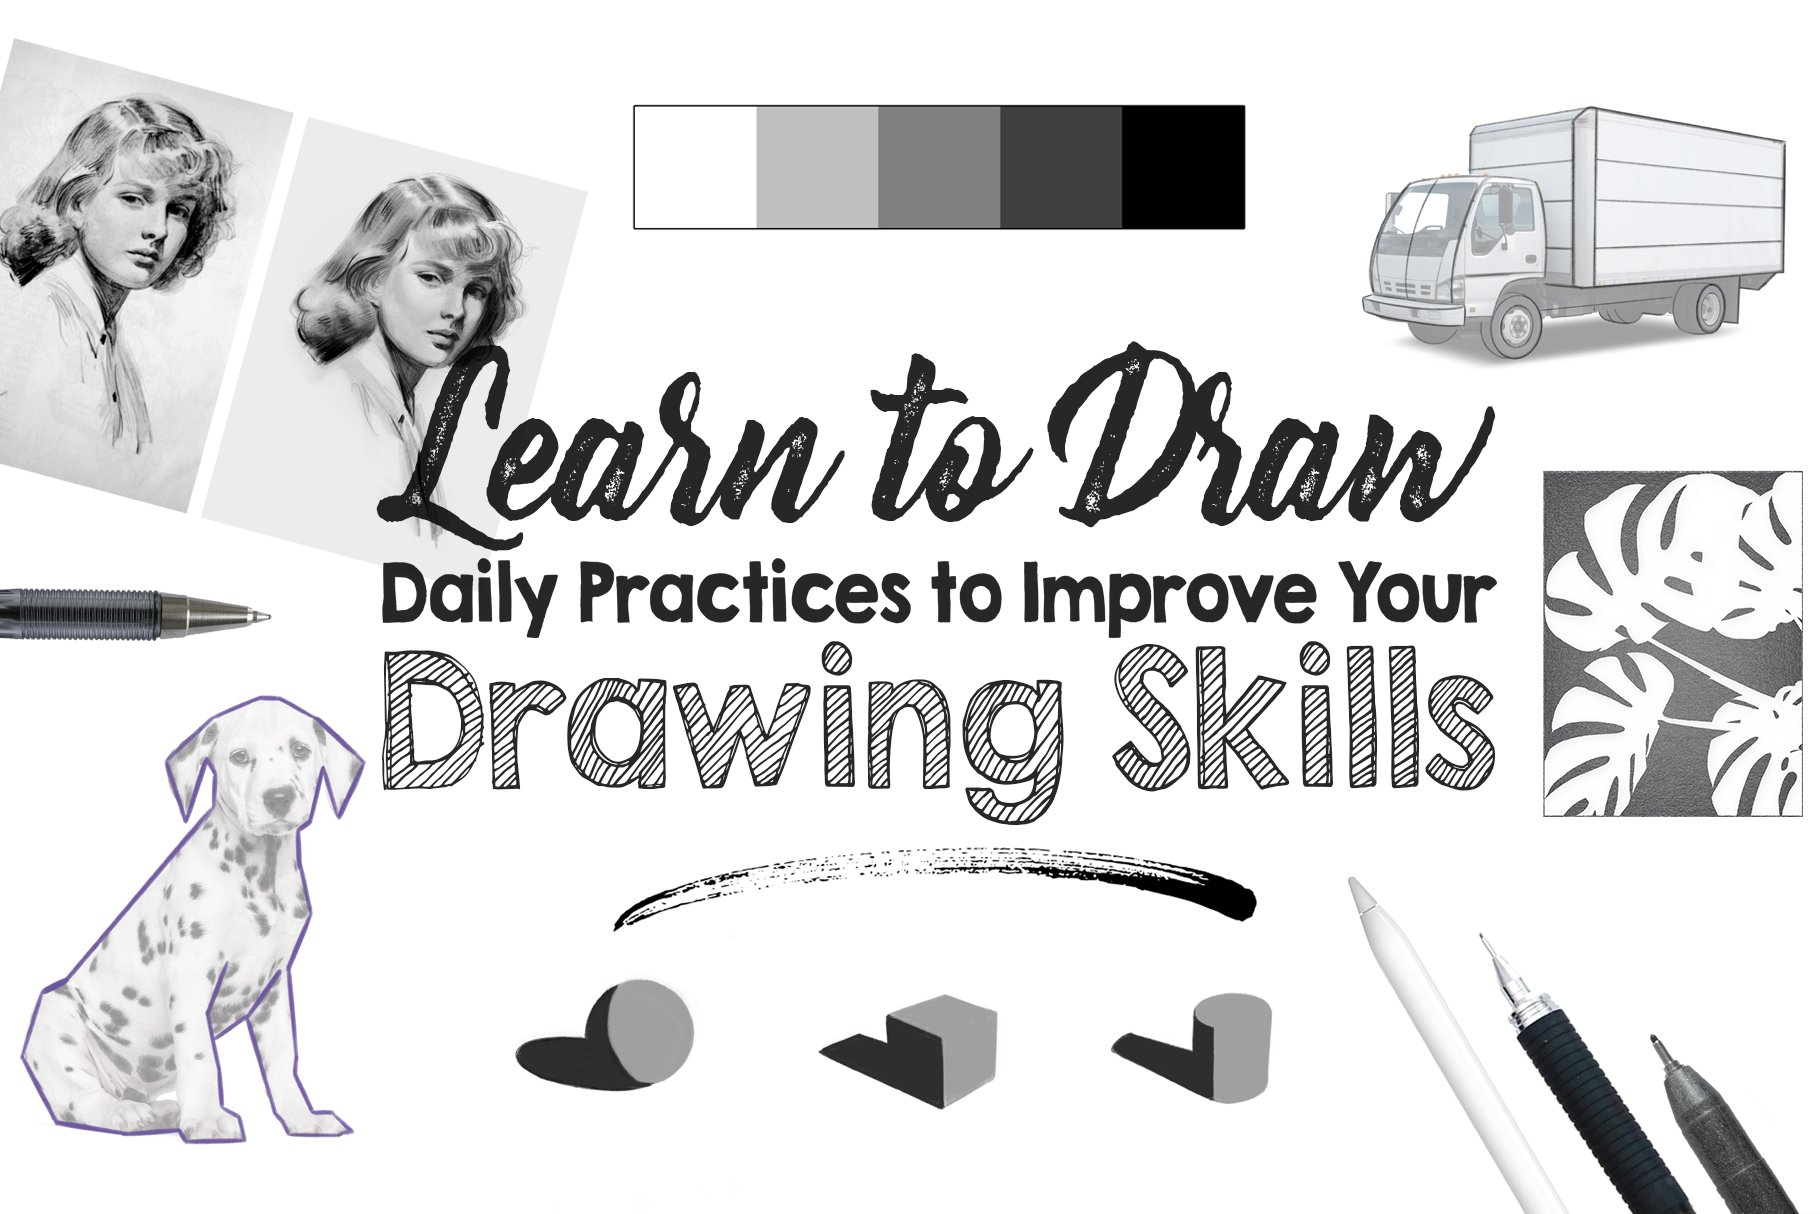 Learn　Skills　Your　to　Improve　Drawing　Draw:　Practices　Daily　to　Design　Cuts